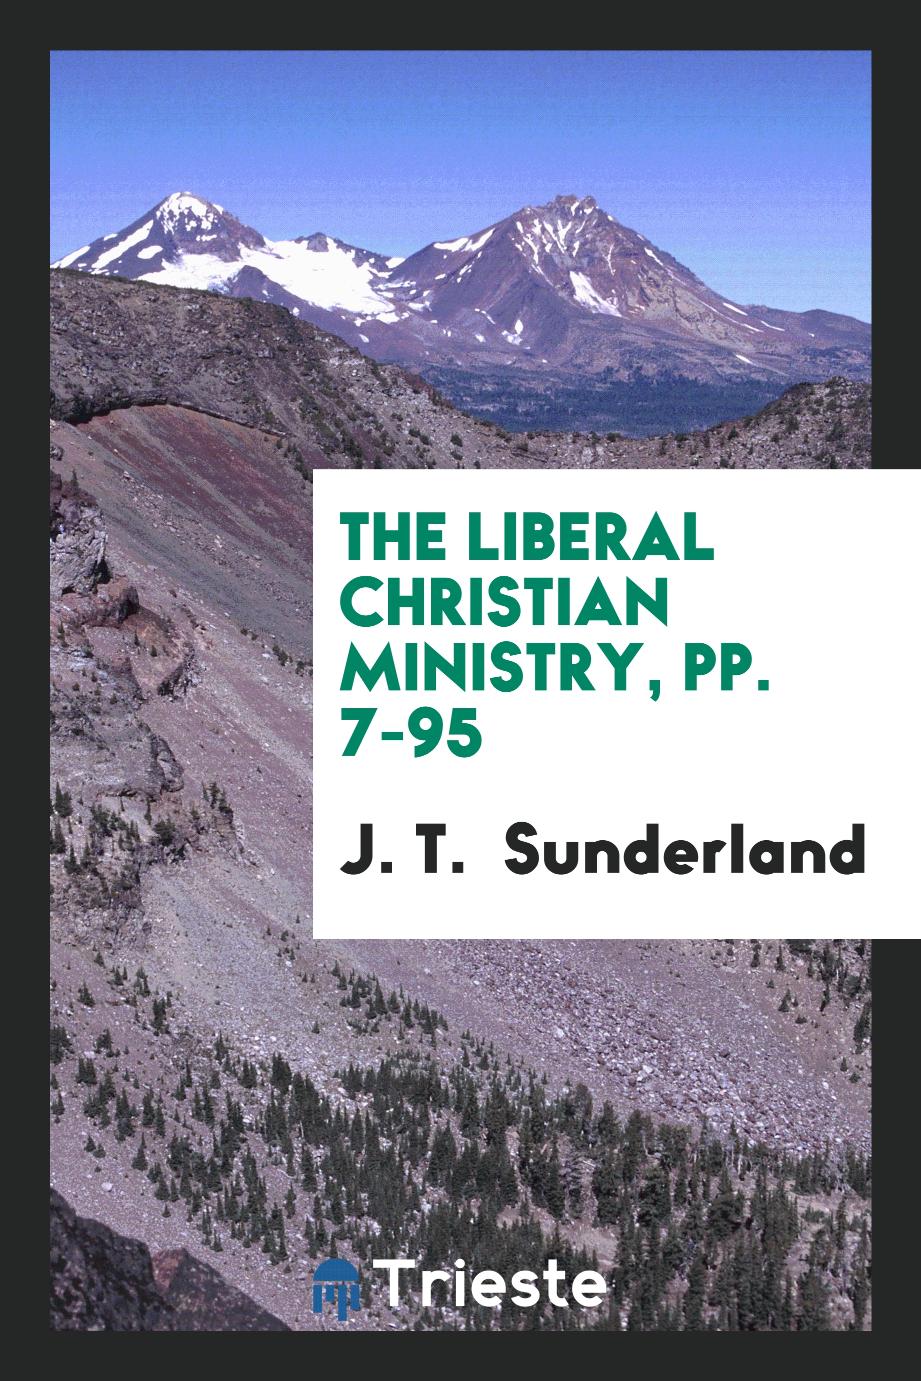 The Liberal Christian Ministry, pp. 7-95